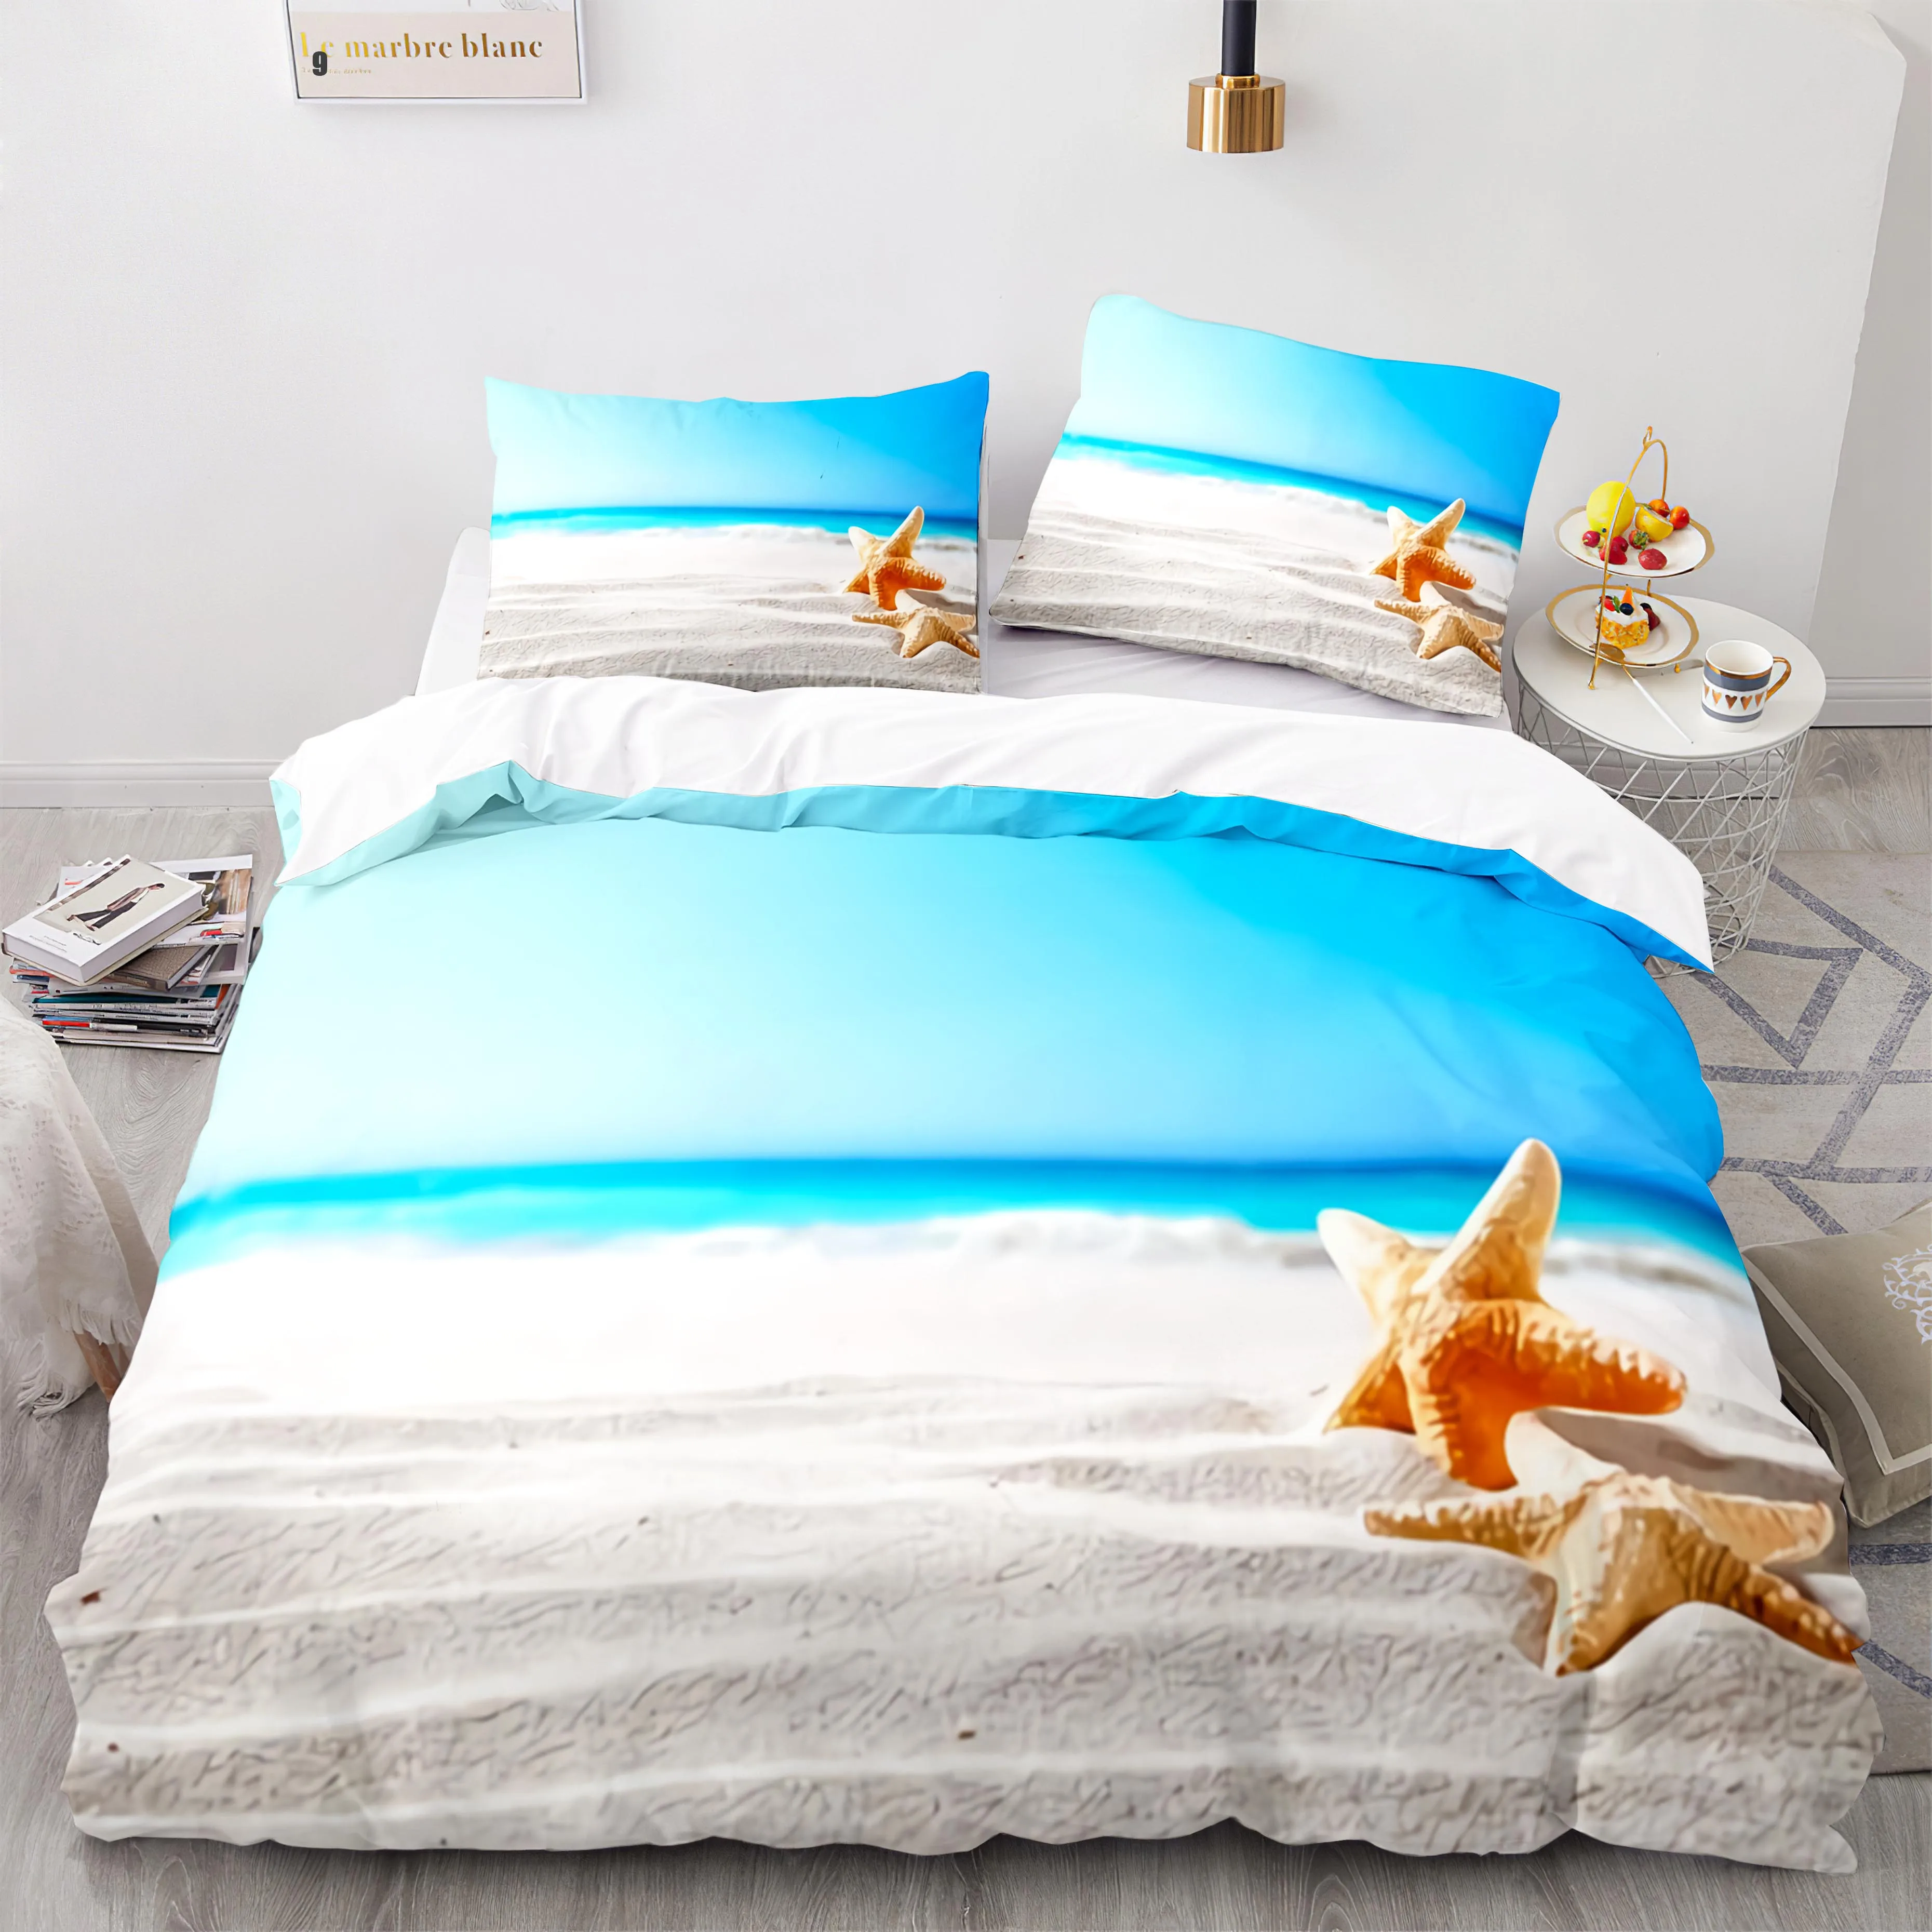 

Ocean Scenery Pattern Painting Multiple Color Duvet Cover Set Bed Pillowcases Luxury Queen Comforter Bedding Sets